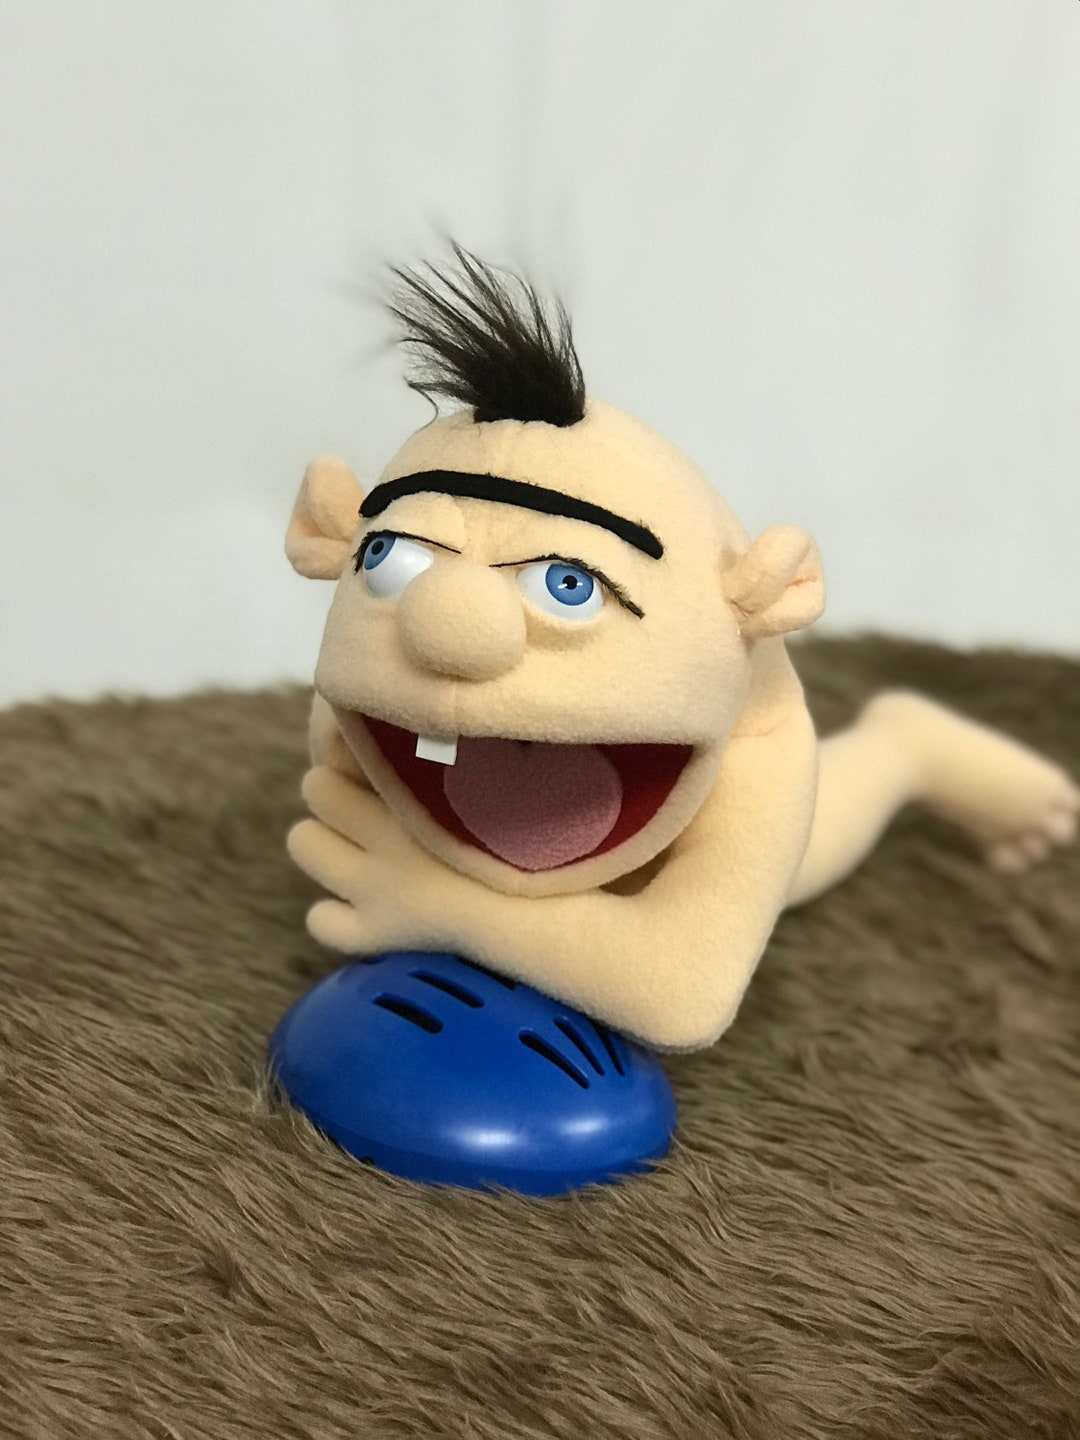 Jeffy Puppet for Free 